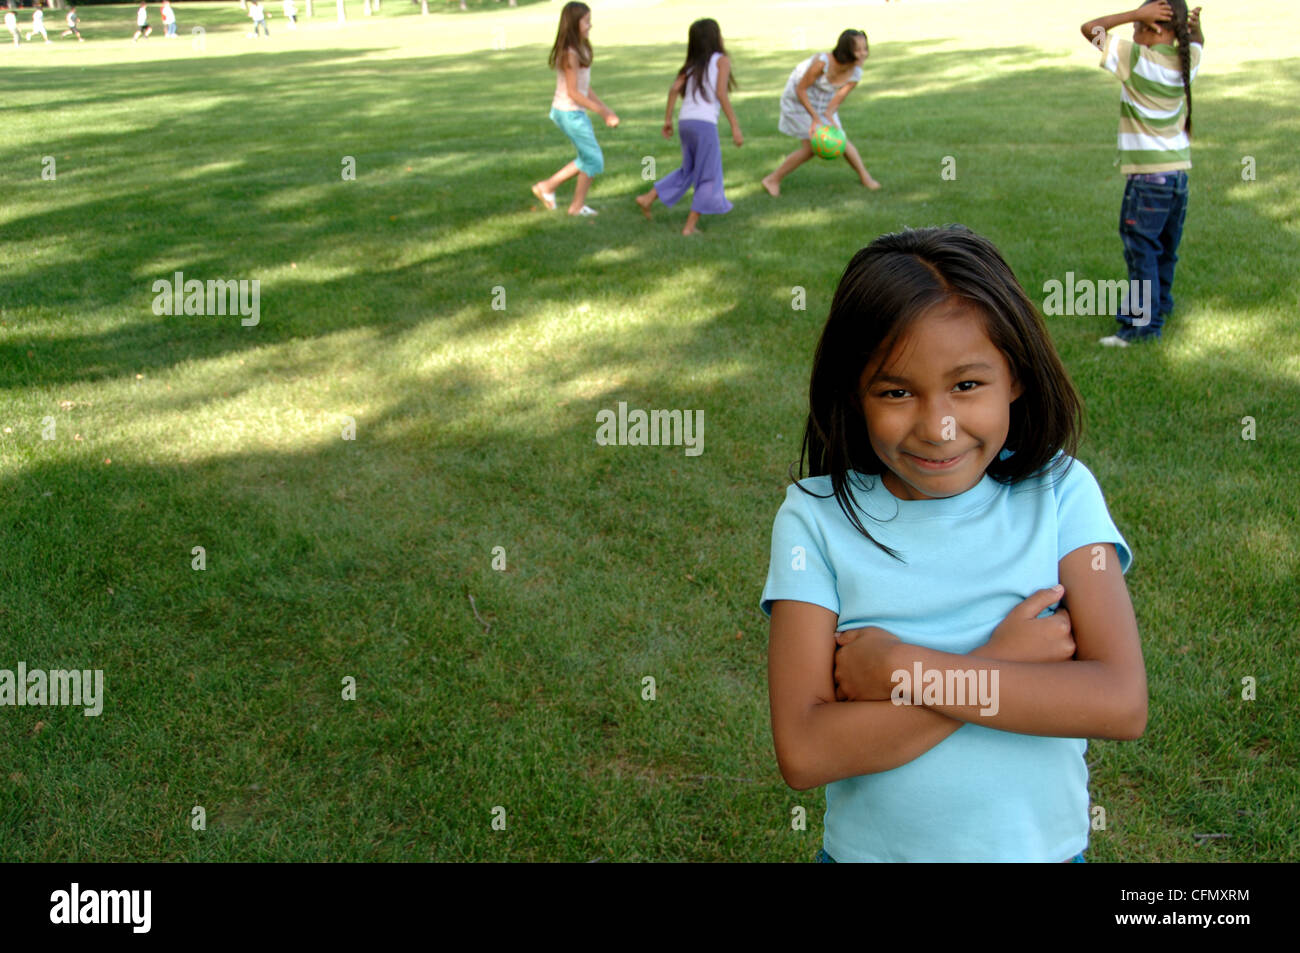 Young Girl in Park, Friends in Background Stock Photo